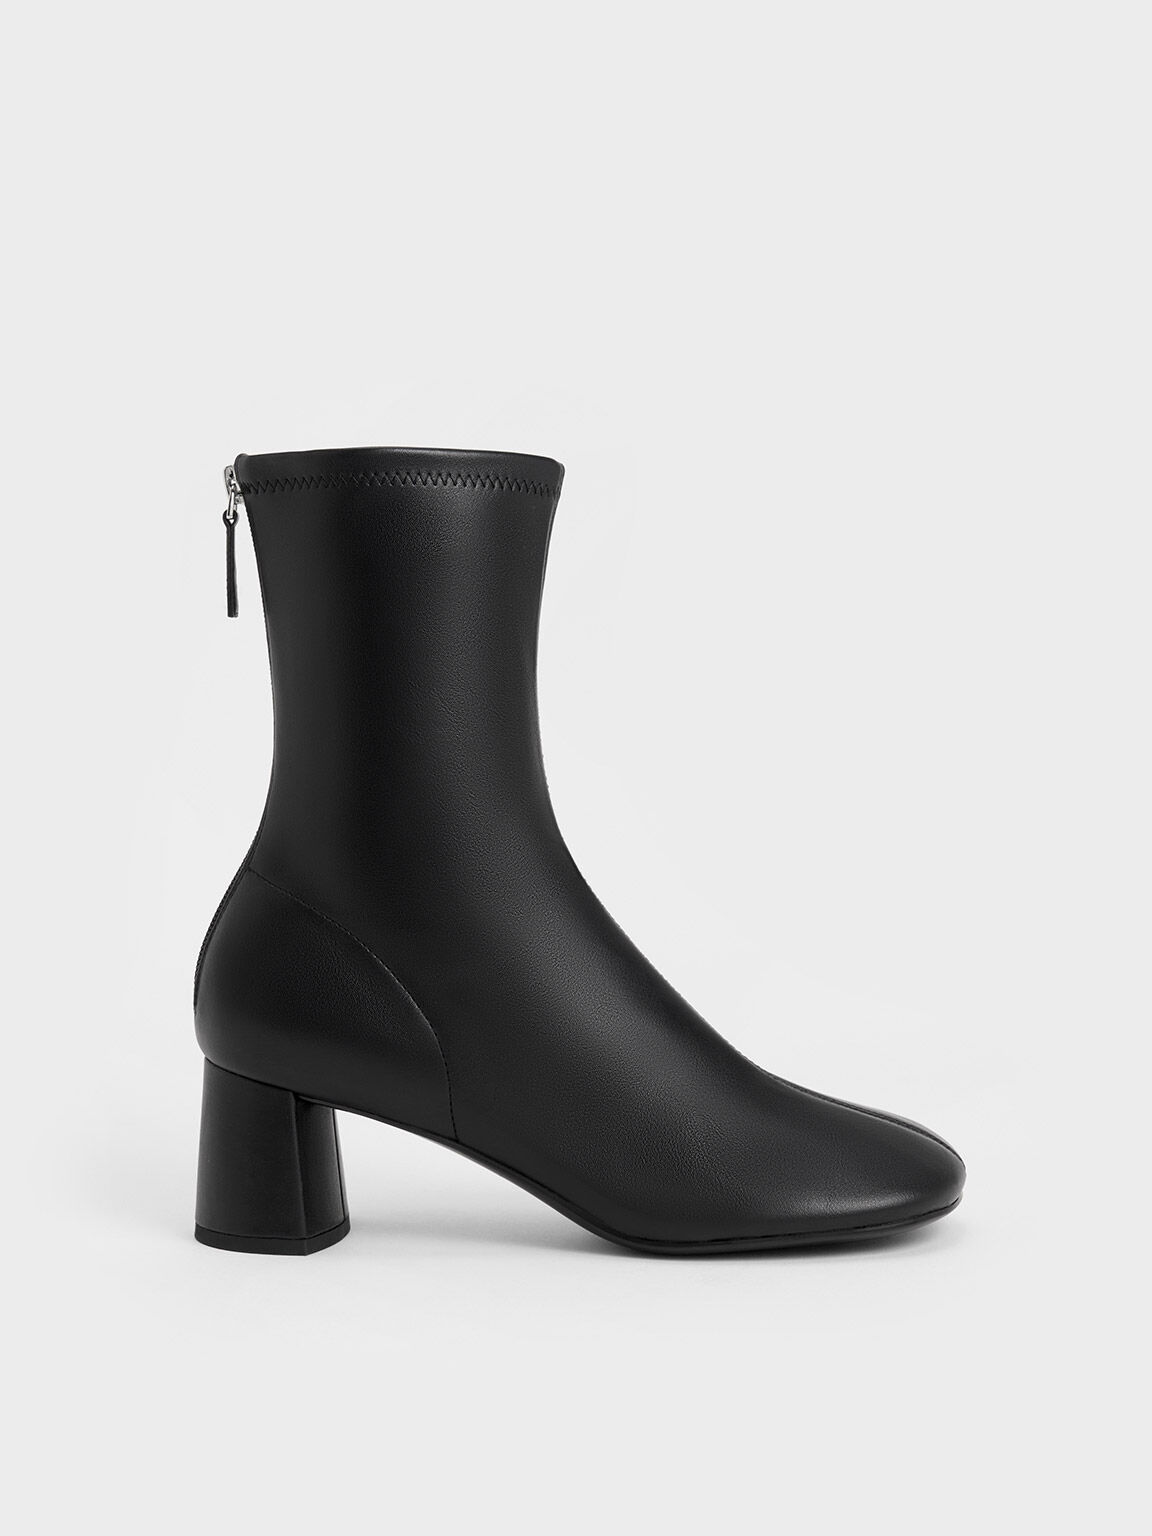 Ladies Ankle Boots With Zip Hotsell | bellvalefarms.com